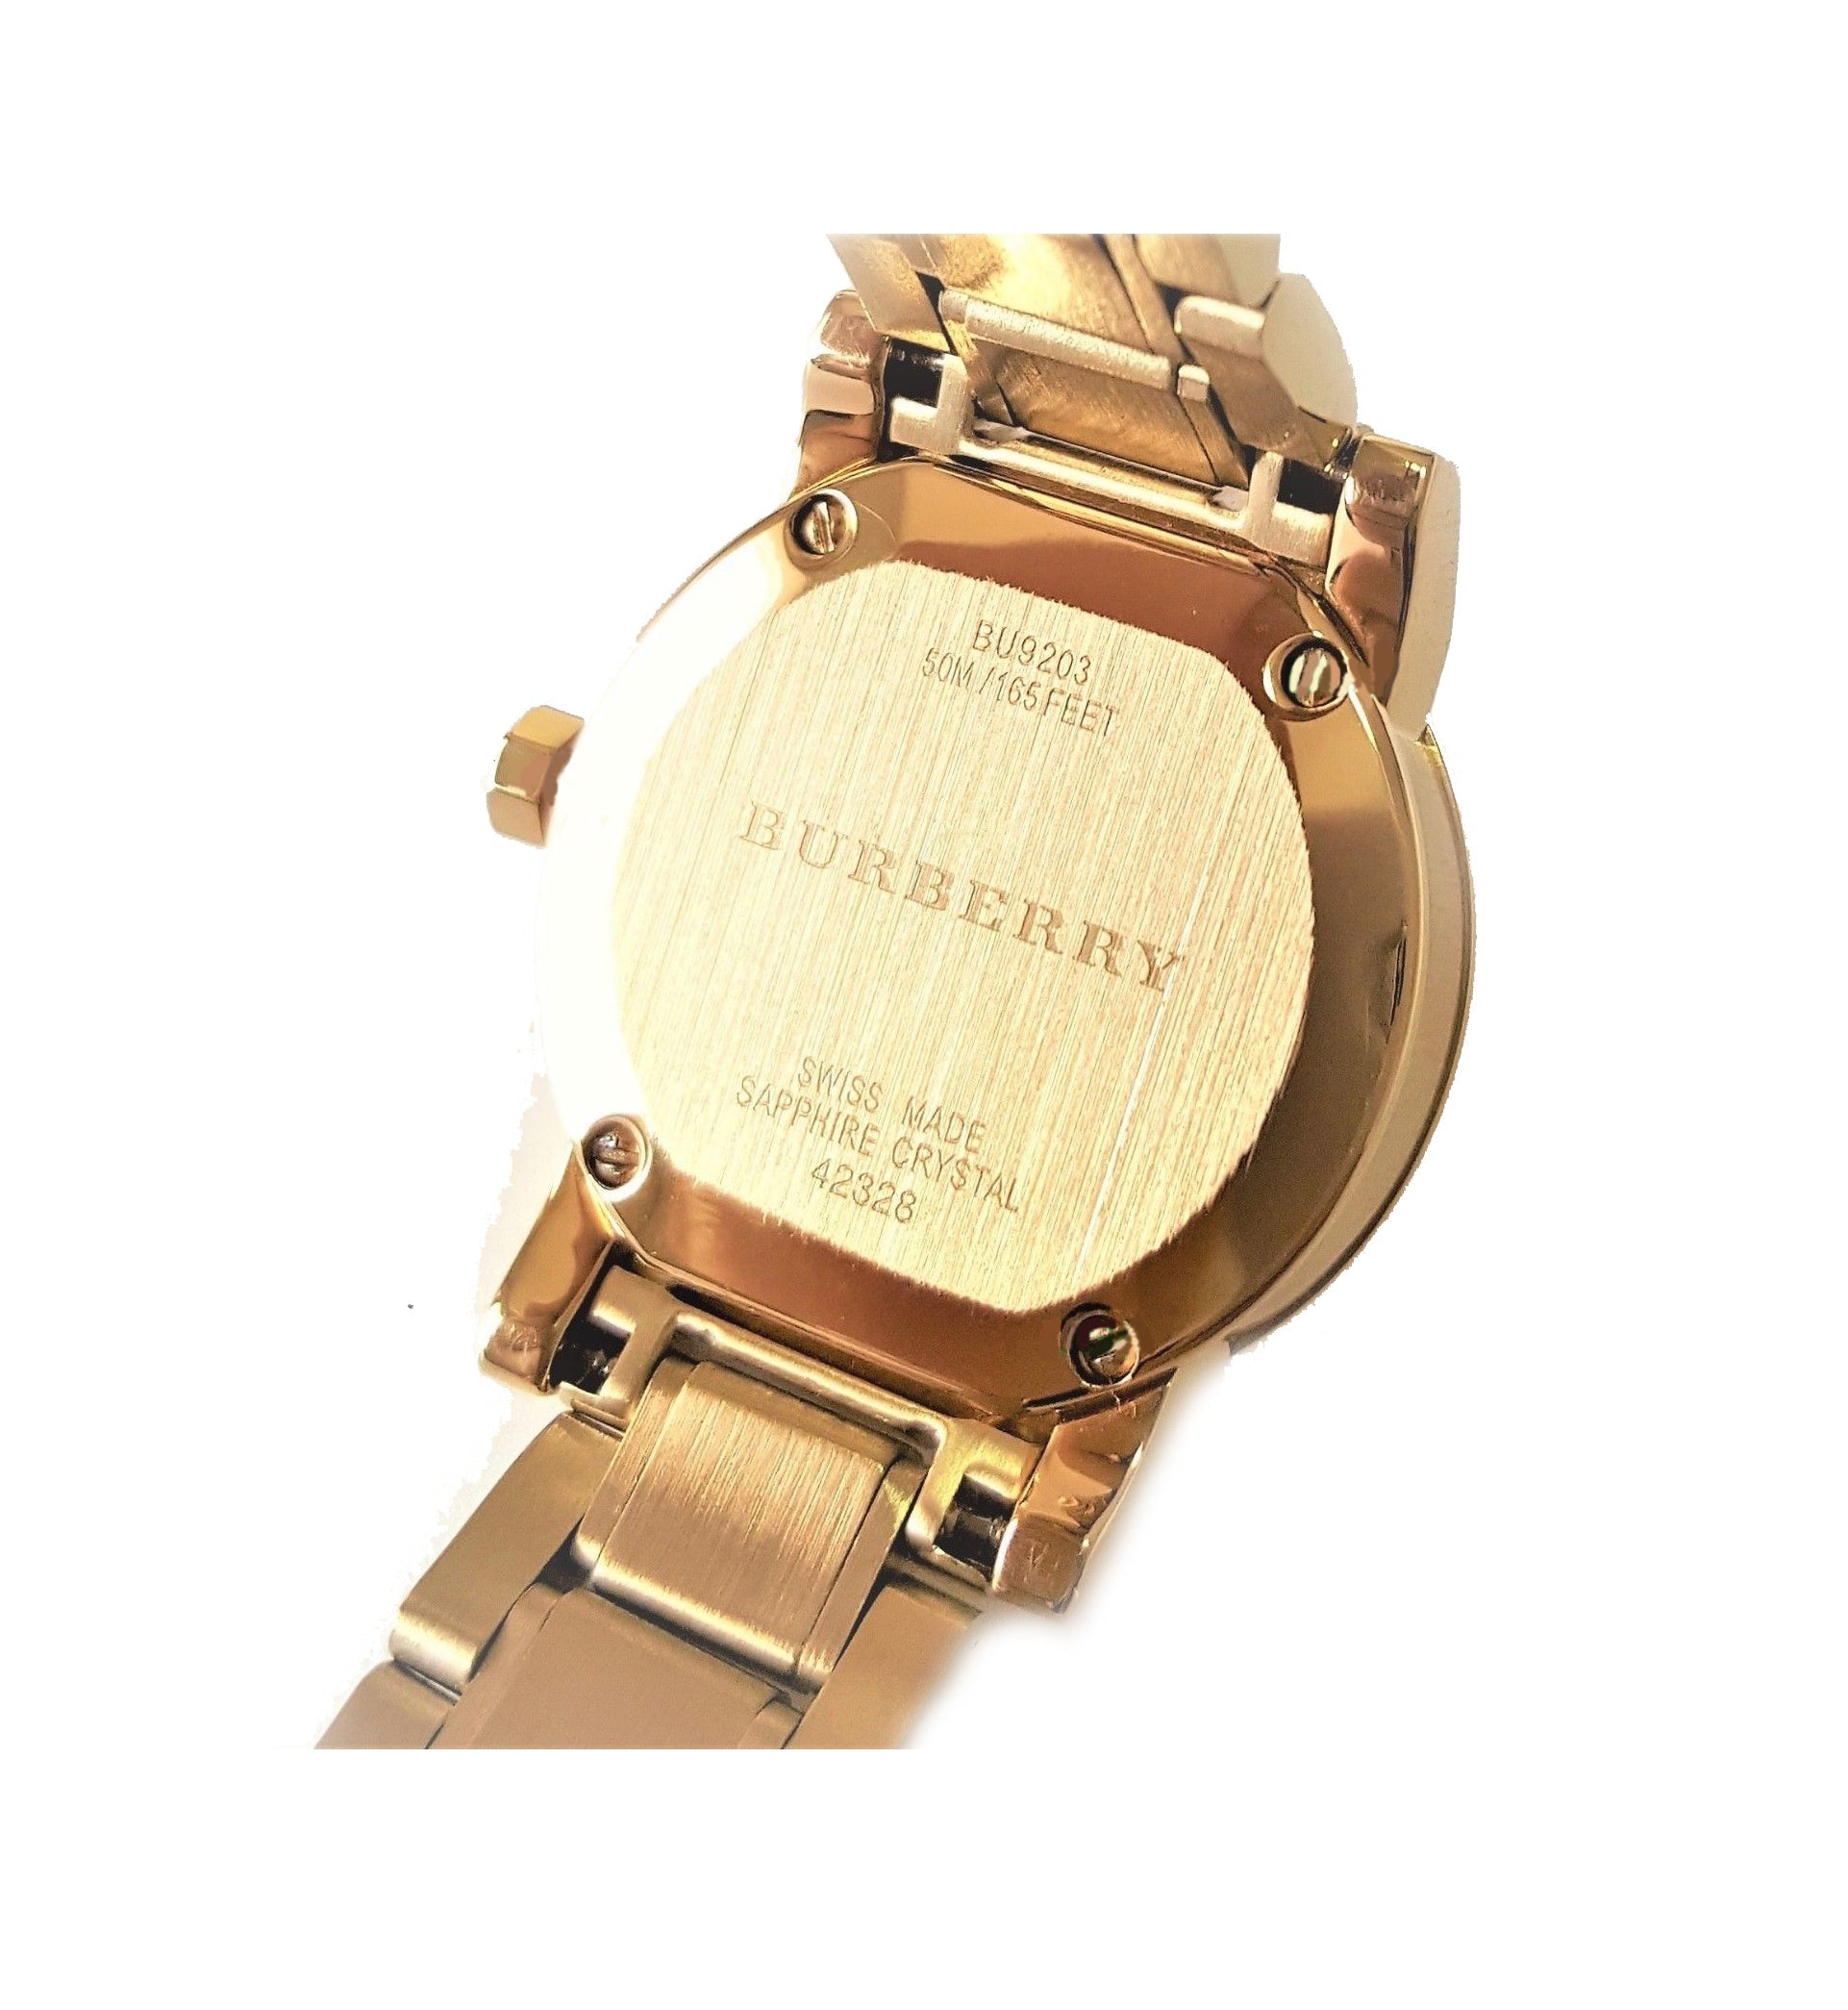 Burberry Heritage White Dial Gold Steel Strap Watch for Women - BU9203